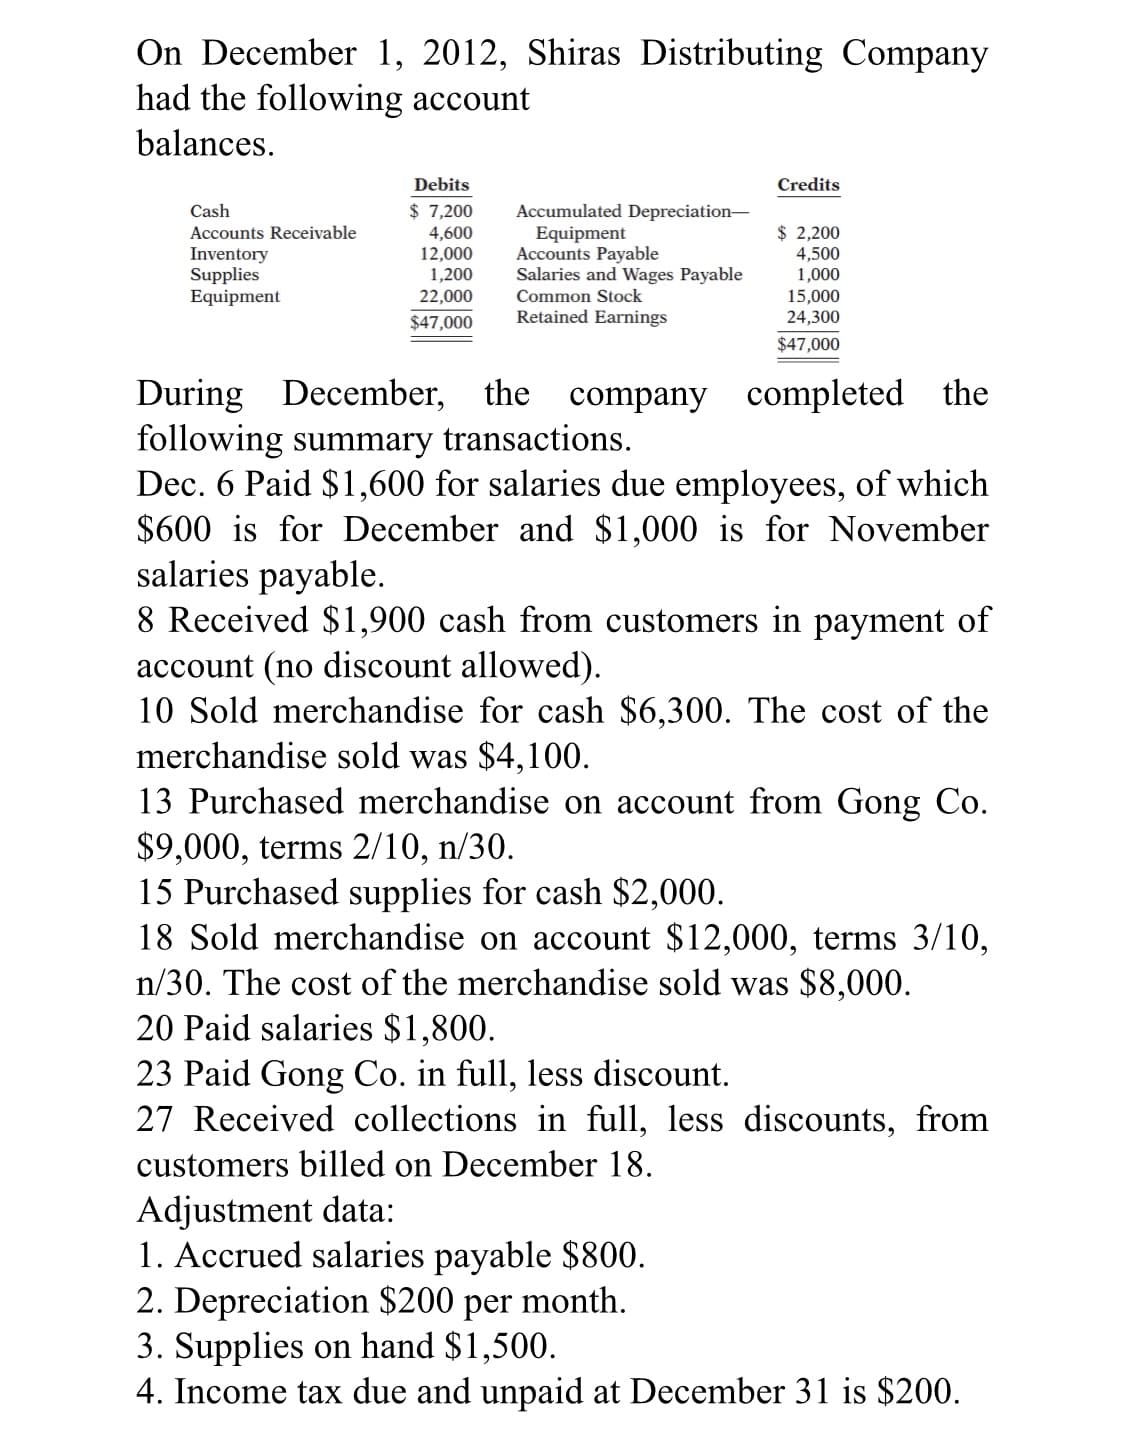 On December 1, 2012, Shiras Distributing Company
had the following account
balances.
Debits
Credits
Cash
$ 7,200
Accumulated Depreciation-
Equipment
Accounts Payable
Salaries and Wages Payable
Common Stock
Retained Earnings
$ 2,200
4,500
1,000
15,000
24,300
Accounts Receivable
Inventory
Supplies
Equipment
4,600
12,000
1,200
22,000
$47,000
$47,000
During
following summary transactions.
Dec. 6 Paid $1,600 for salaries due employees, of which
$600 is for December and $1,000 is for November
salaries payable.
8 Received $1,900 cash from customers in payment of
account (no discount allowed).
10 Sold merchandise for cash $6,300. The cost of the
merchandise sold was $4,100.
13 Purchased merchandise on account from Gong Co.
$9,000, terms 2/10, n/30.
15 Purchased supplies for cash $2,000.
18 Sold merchandise on account $12,000, terms 3/10,
n/30. The cost of the merchandise sold was $8,000.
20 Paid salaries $1,800.
23 Paid Gong Co. in full, less discount.
27 Received collections in full, less discounts, from
December, the company completed the
customers billed on December 18.
Adjustment data:
1. Accrued salaries payable $800.
2. Depreciation $200 per month.
3. Supplies on hand $1,500.
4. Income tax due and unpaid at December 31 is $200.
